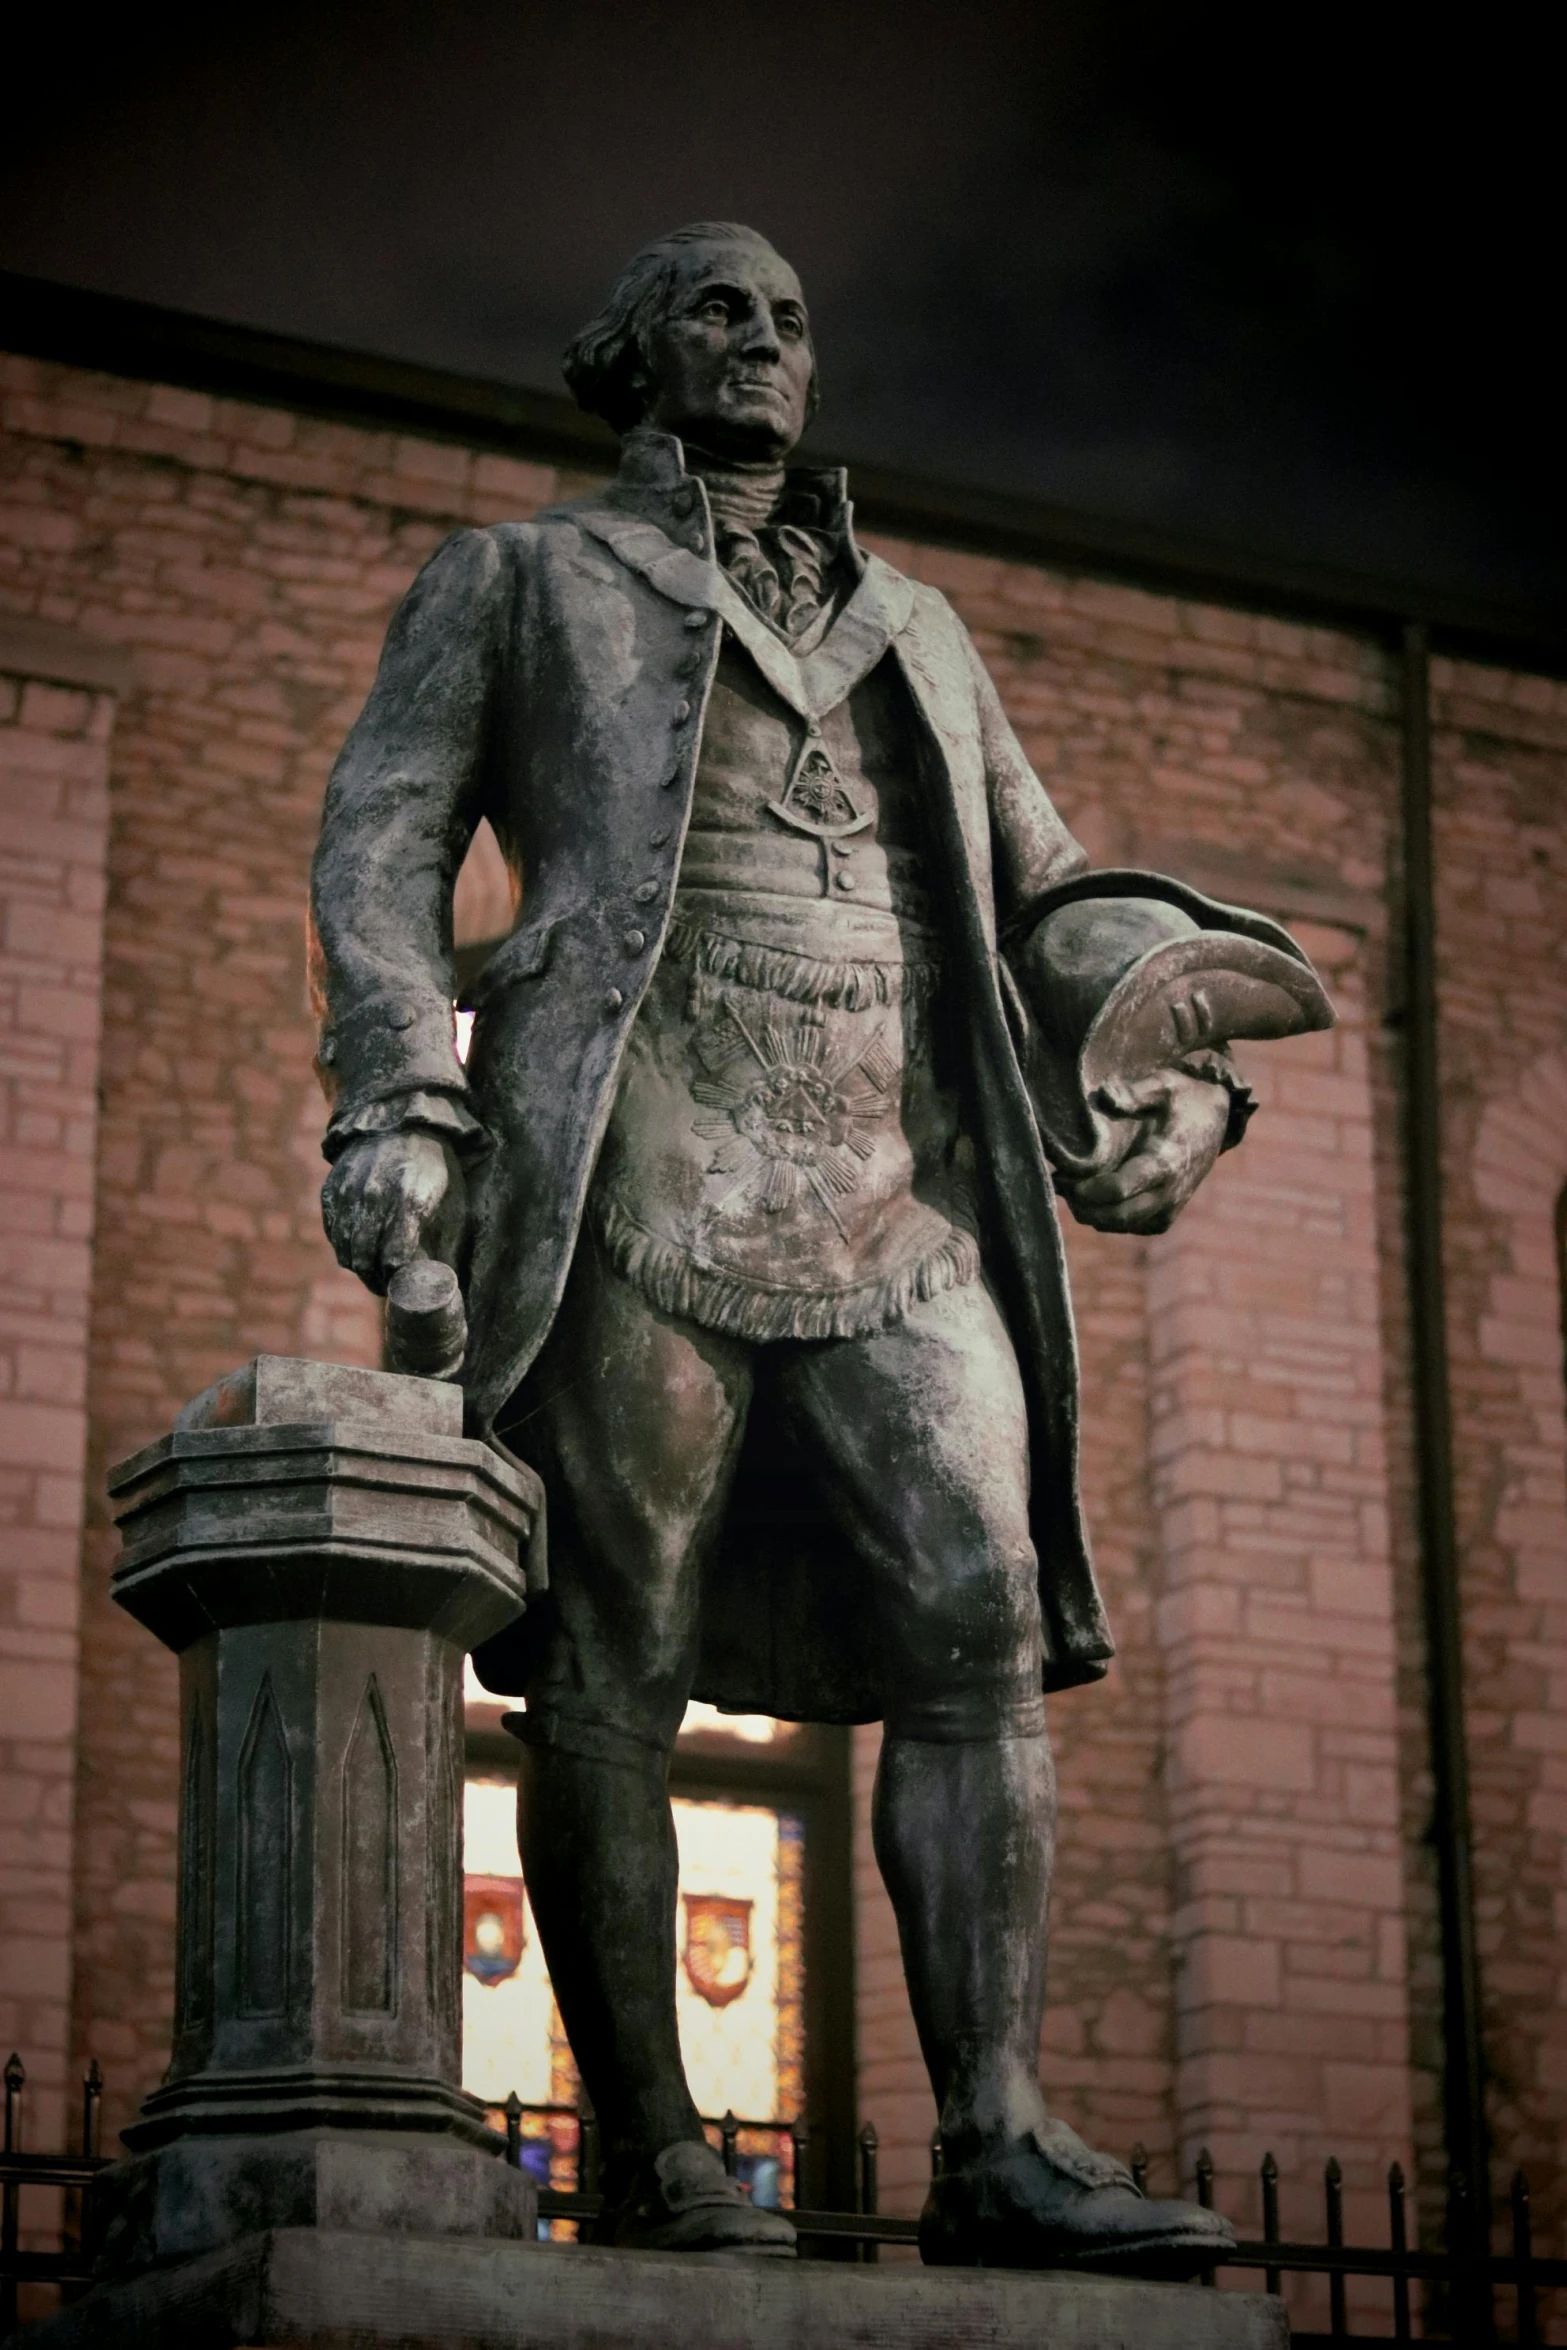 an ornate bronze statue standing next to a brick building